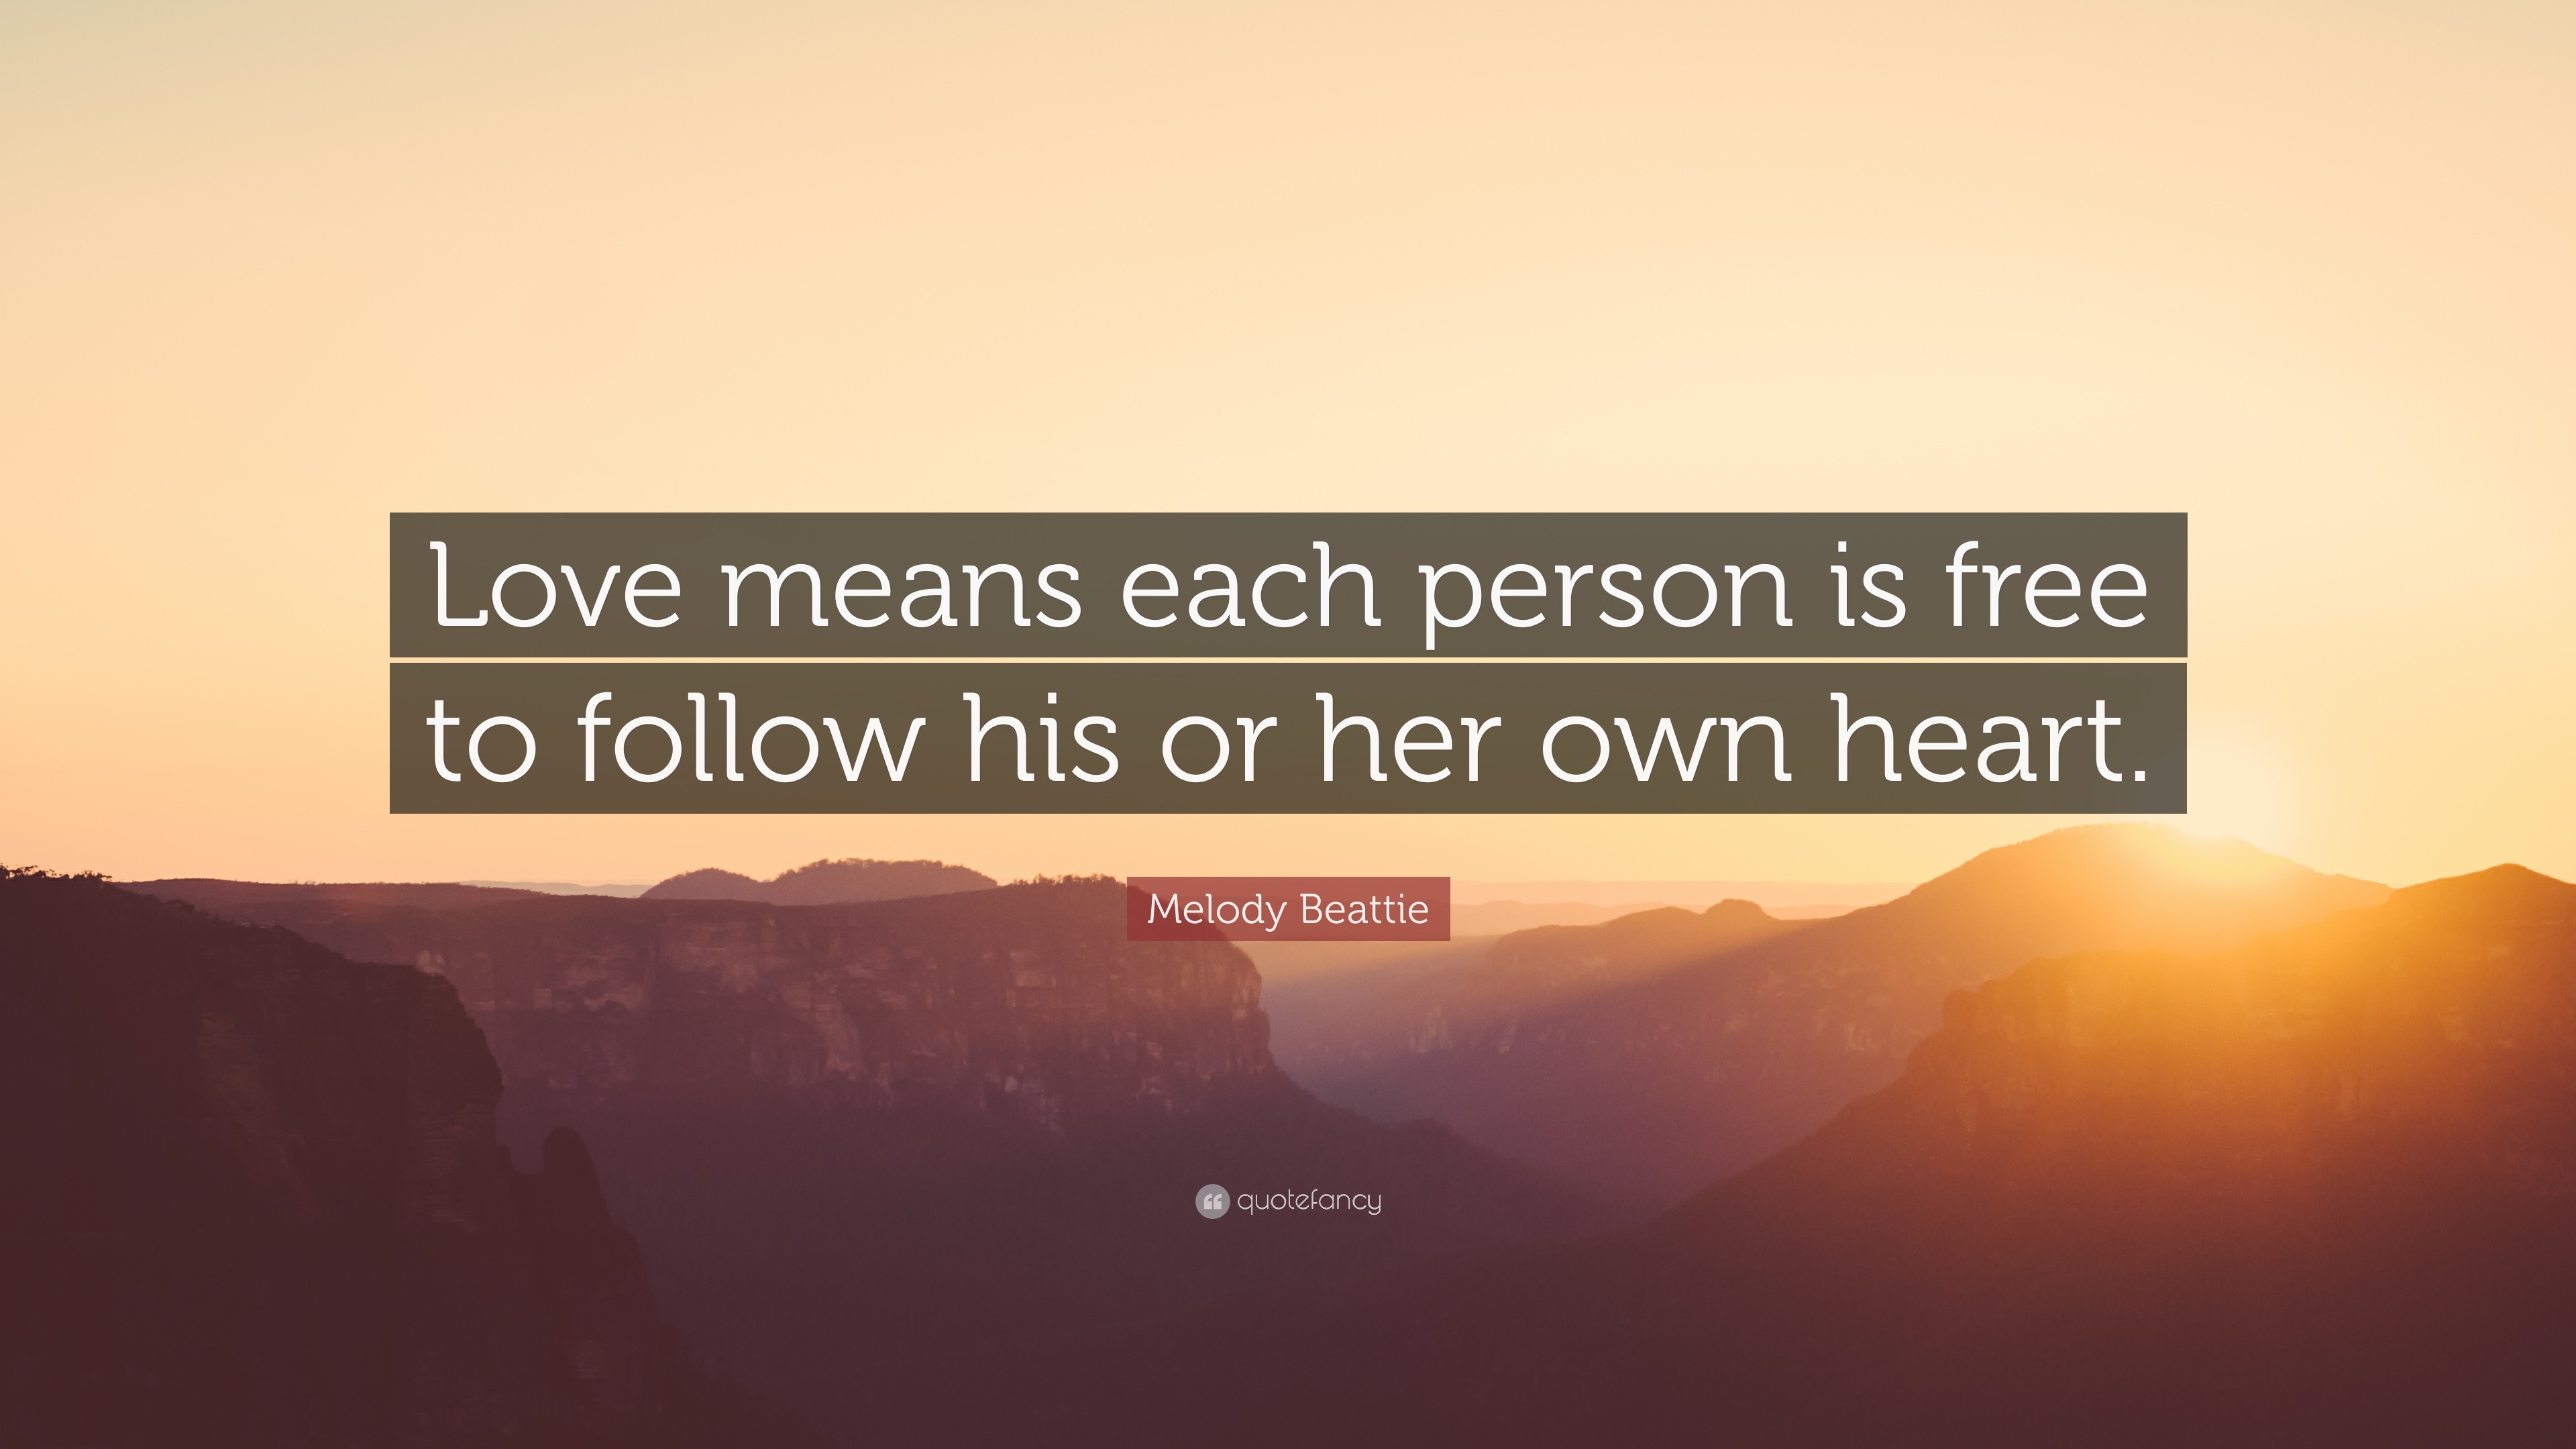 Melody Beattie Quote: “Love means each person is free to follow his or her  own heart.”